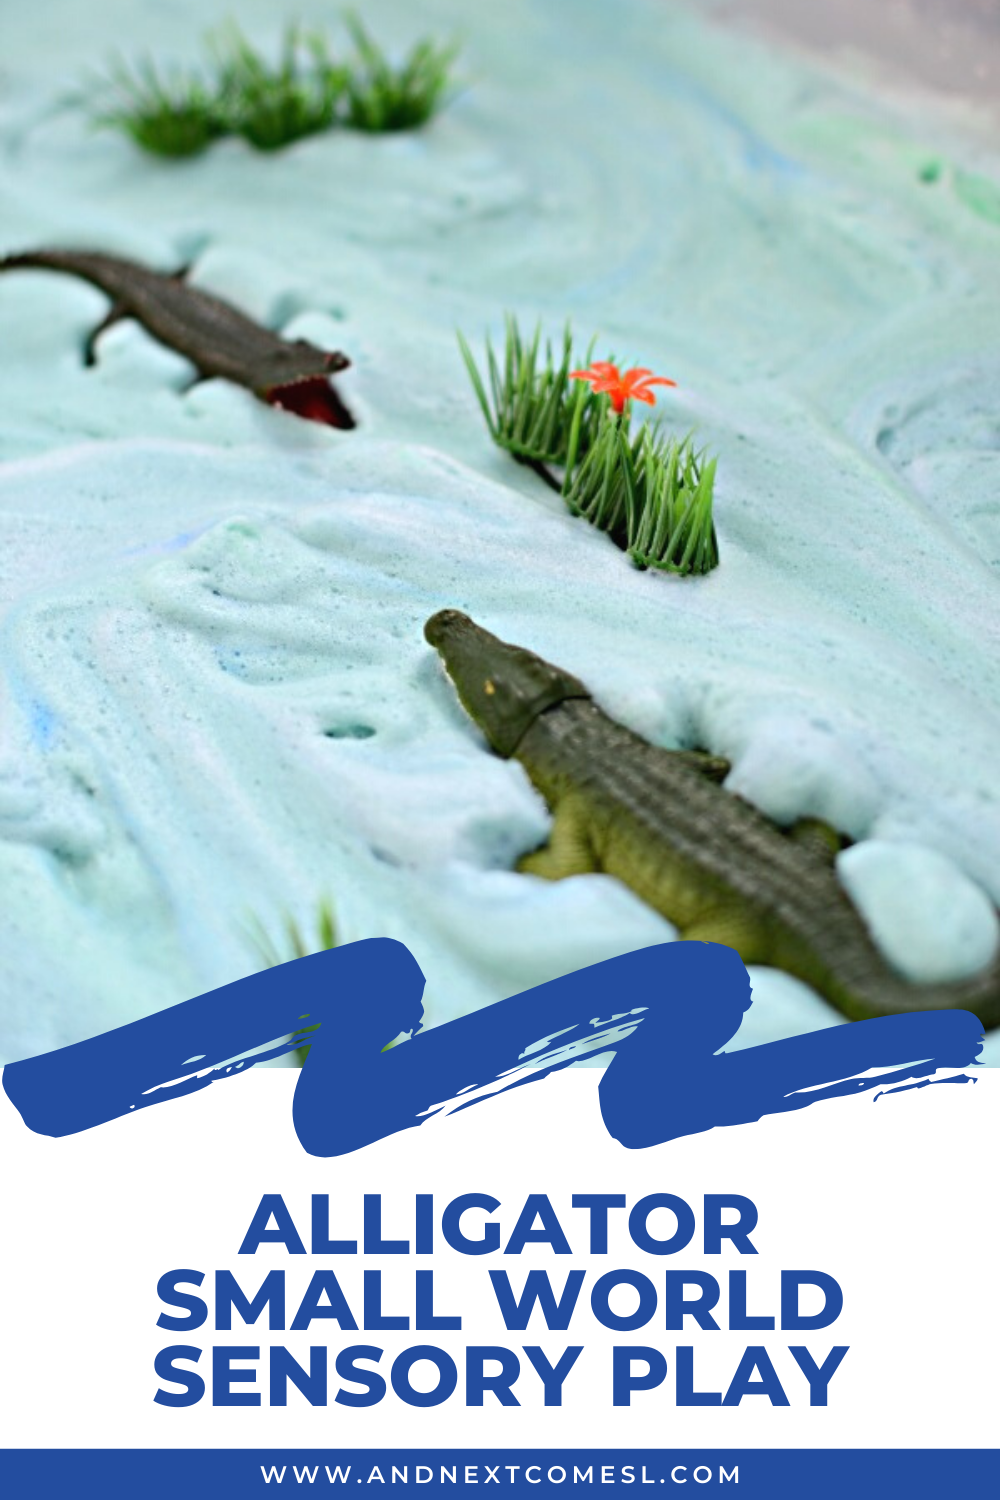 Alligator swamp sensory bin and small world activity for toddlers and preschool kids